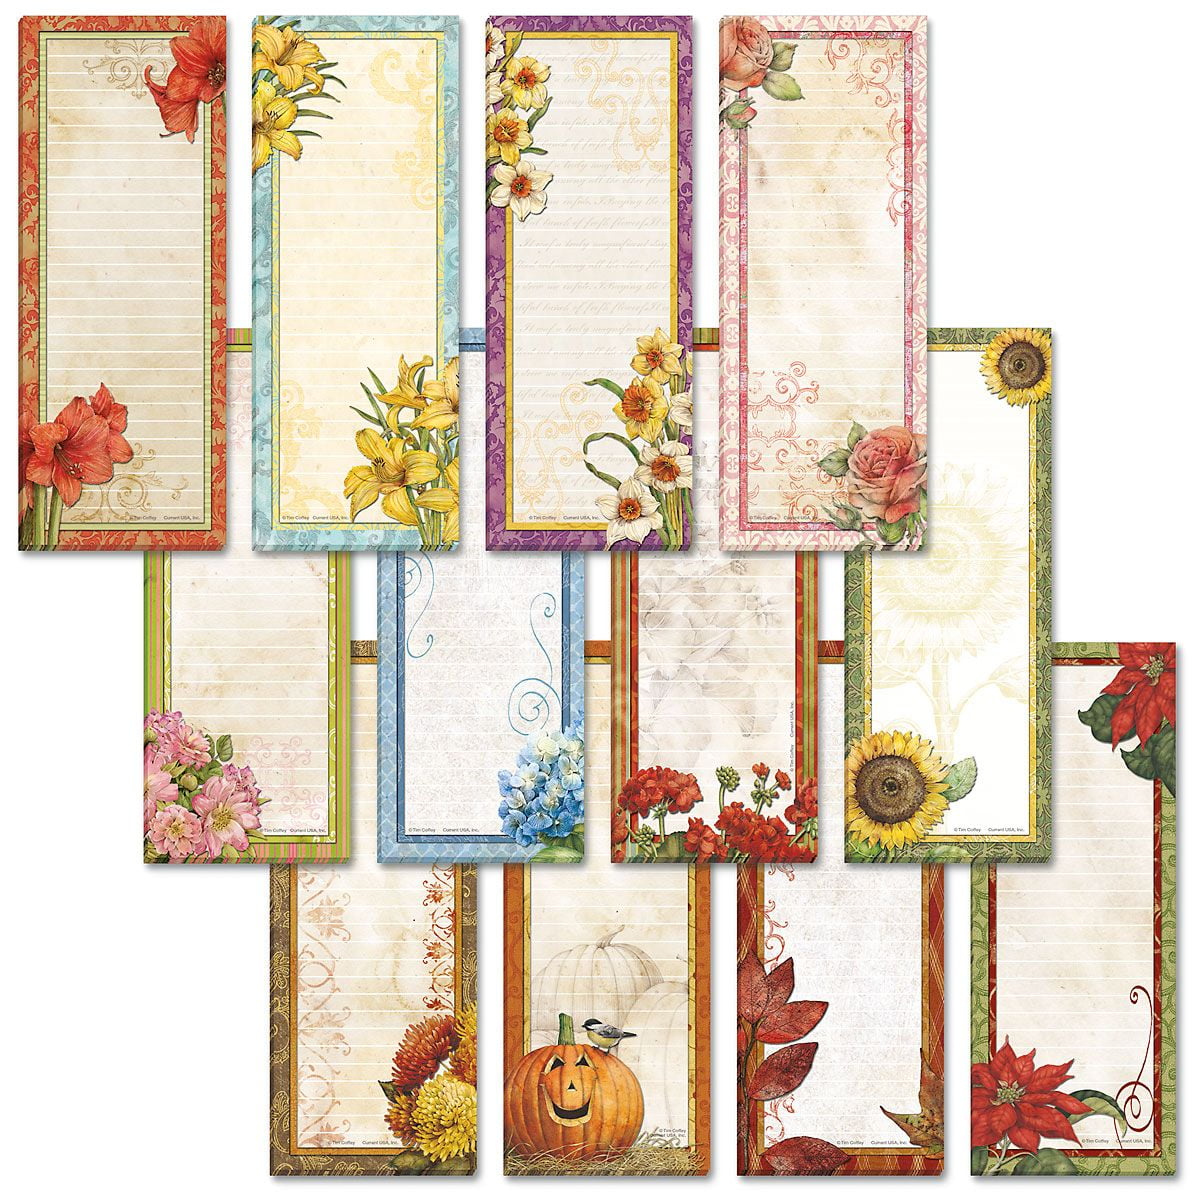 1 Complete Year Set of 12 Magnetic Memo Note Pads Seasonal Monthly Themes 